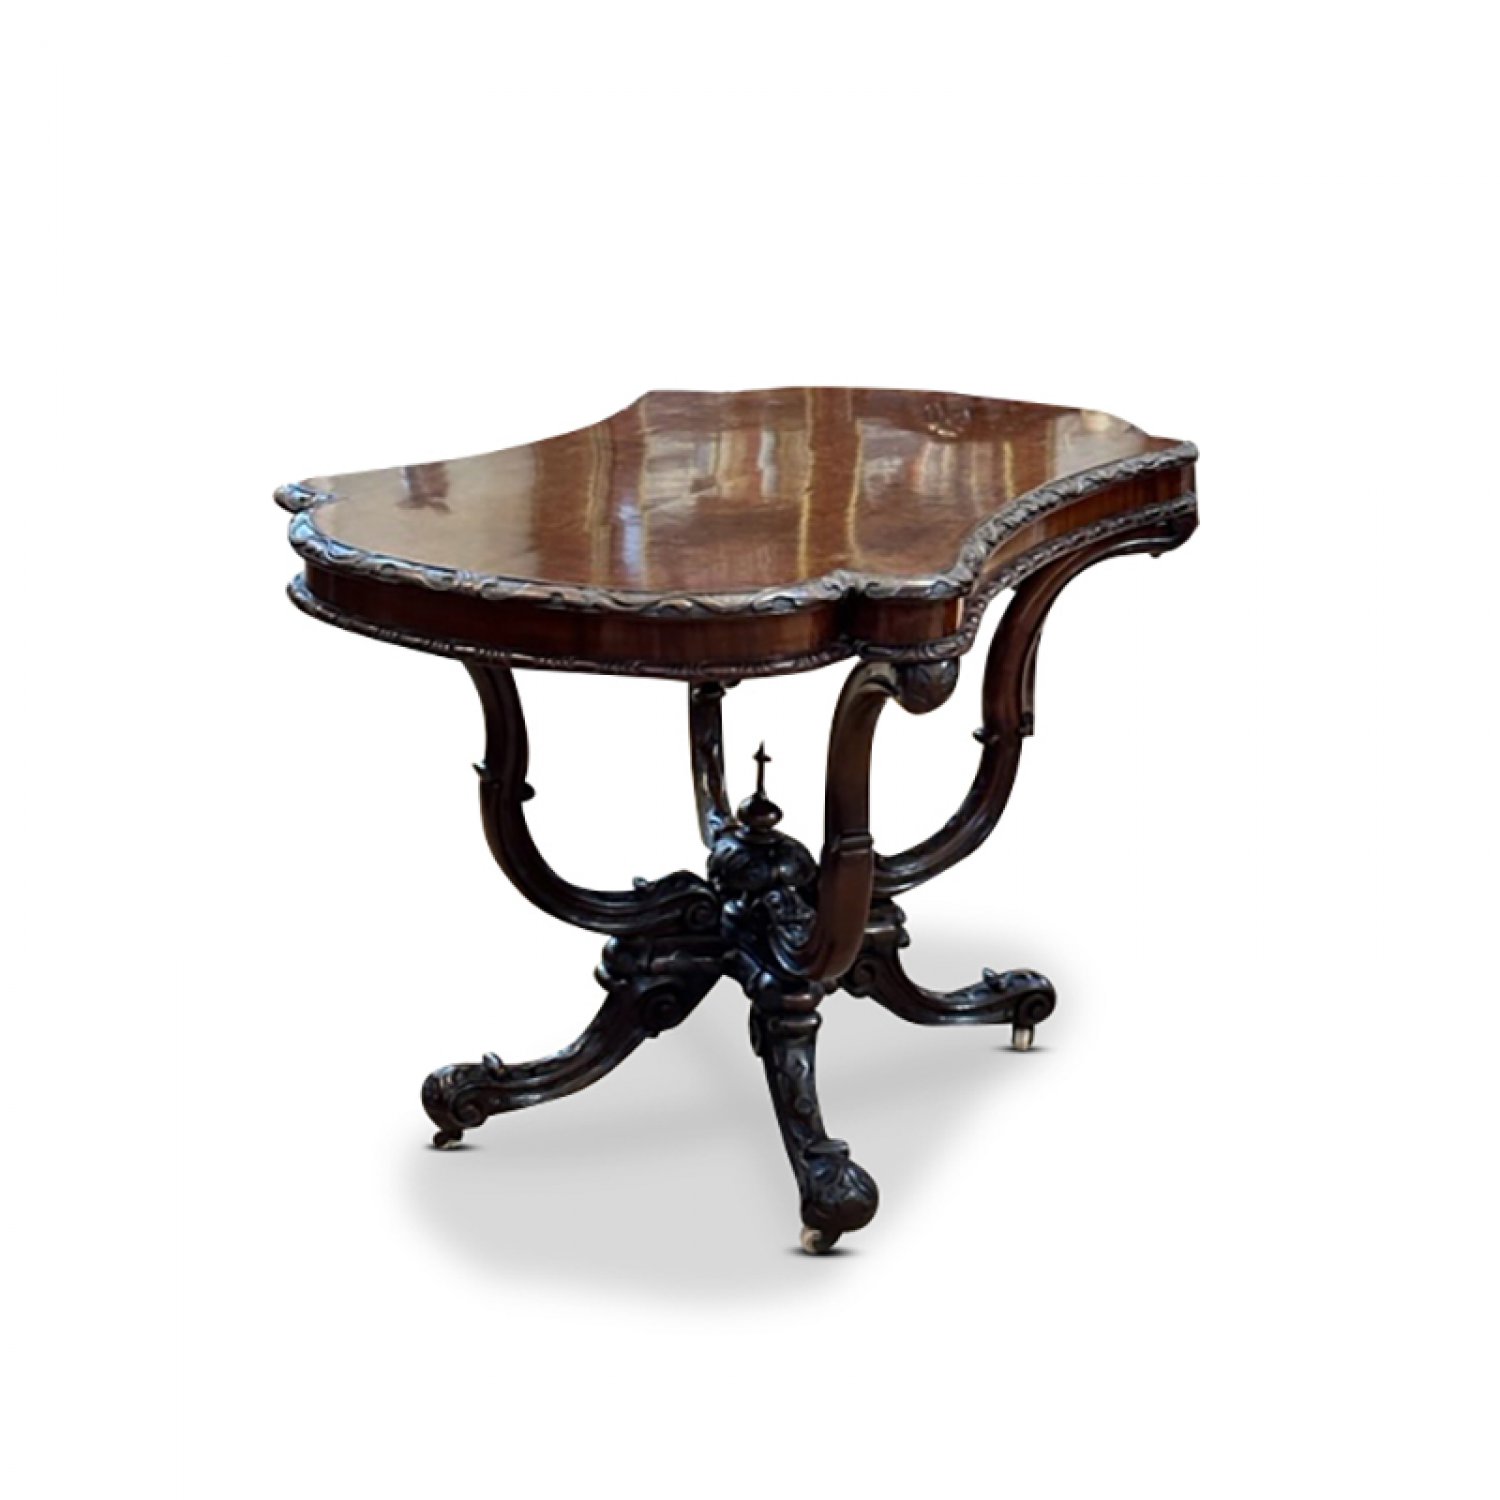 Burr walnut occasional table with an ornate birdcage base